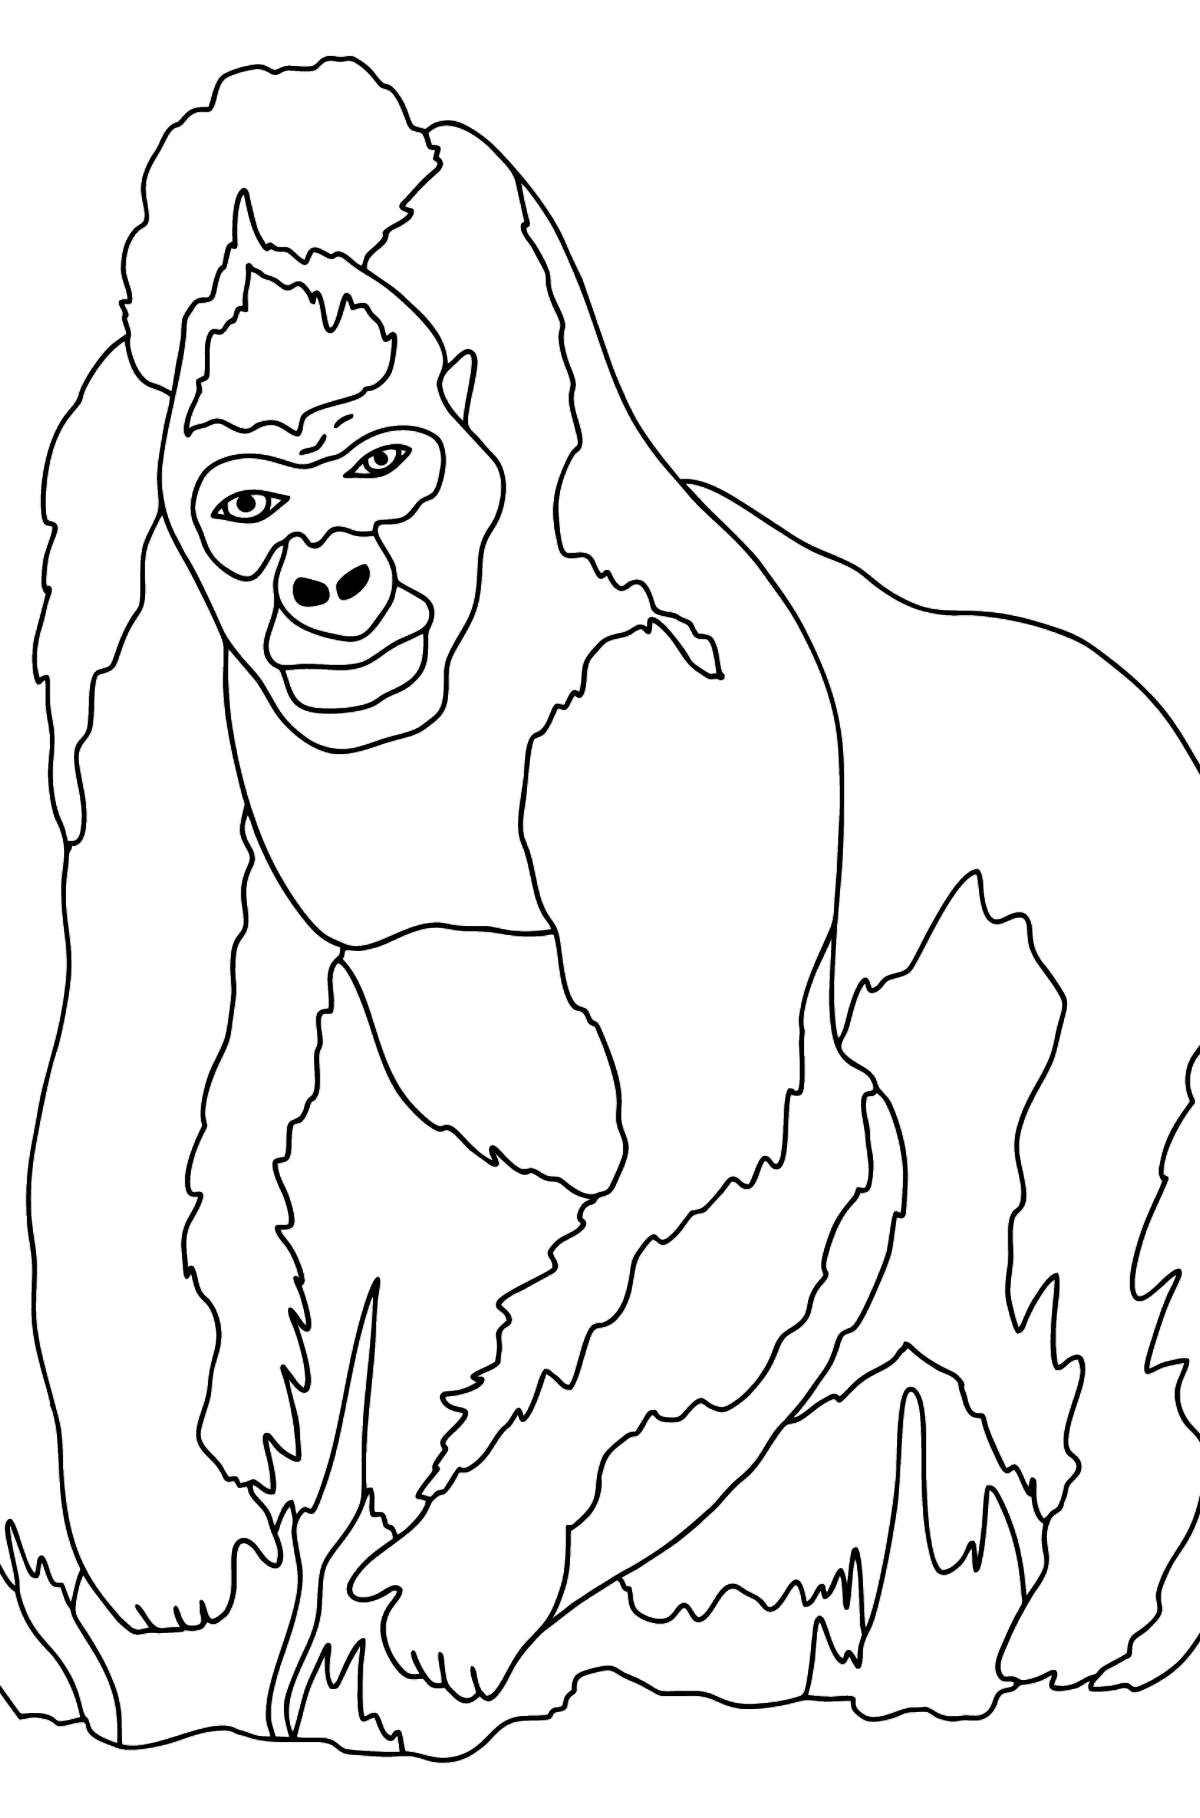 Coloring Page - A Hairy Gorilla - Coloring Pages for Kids